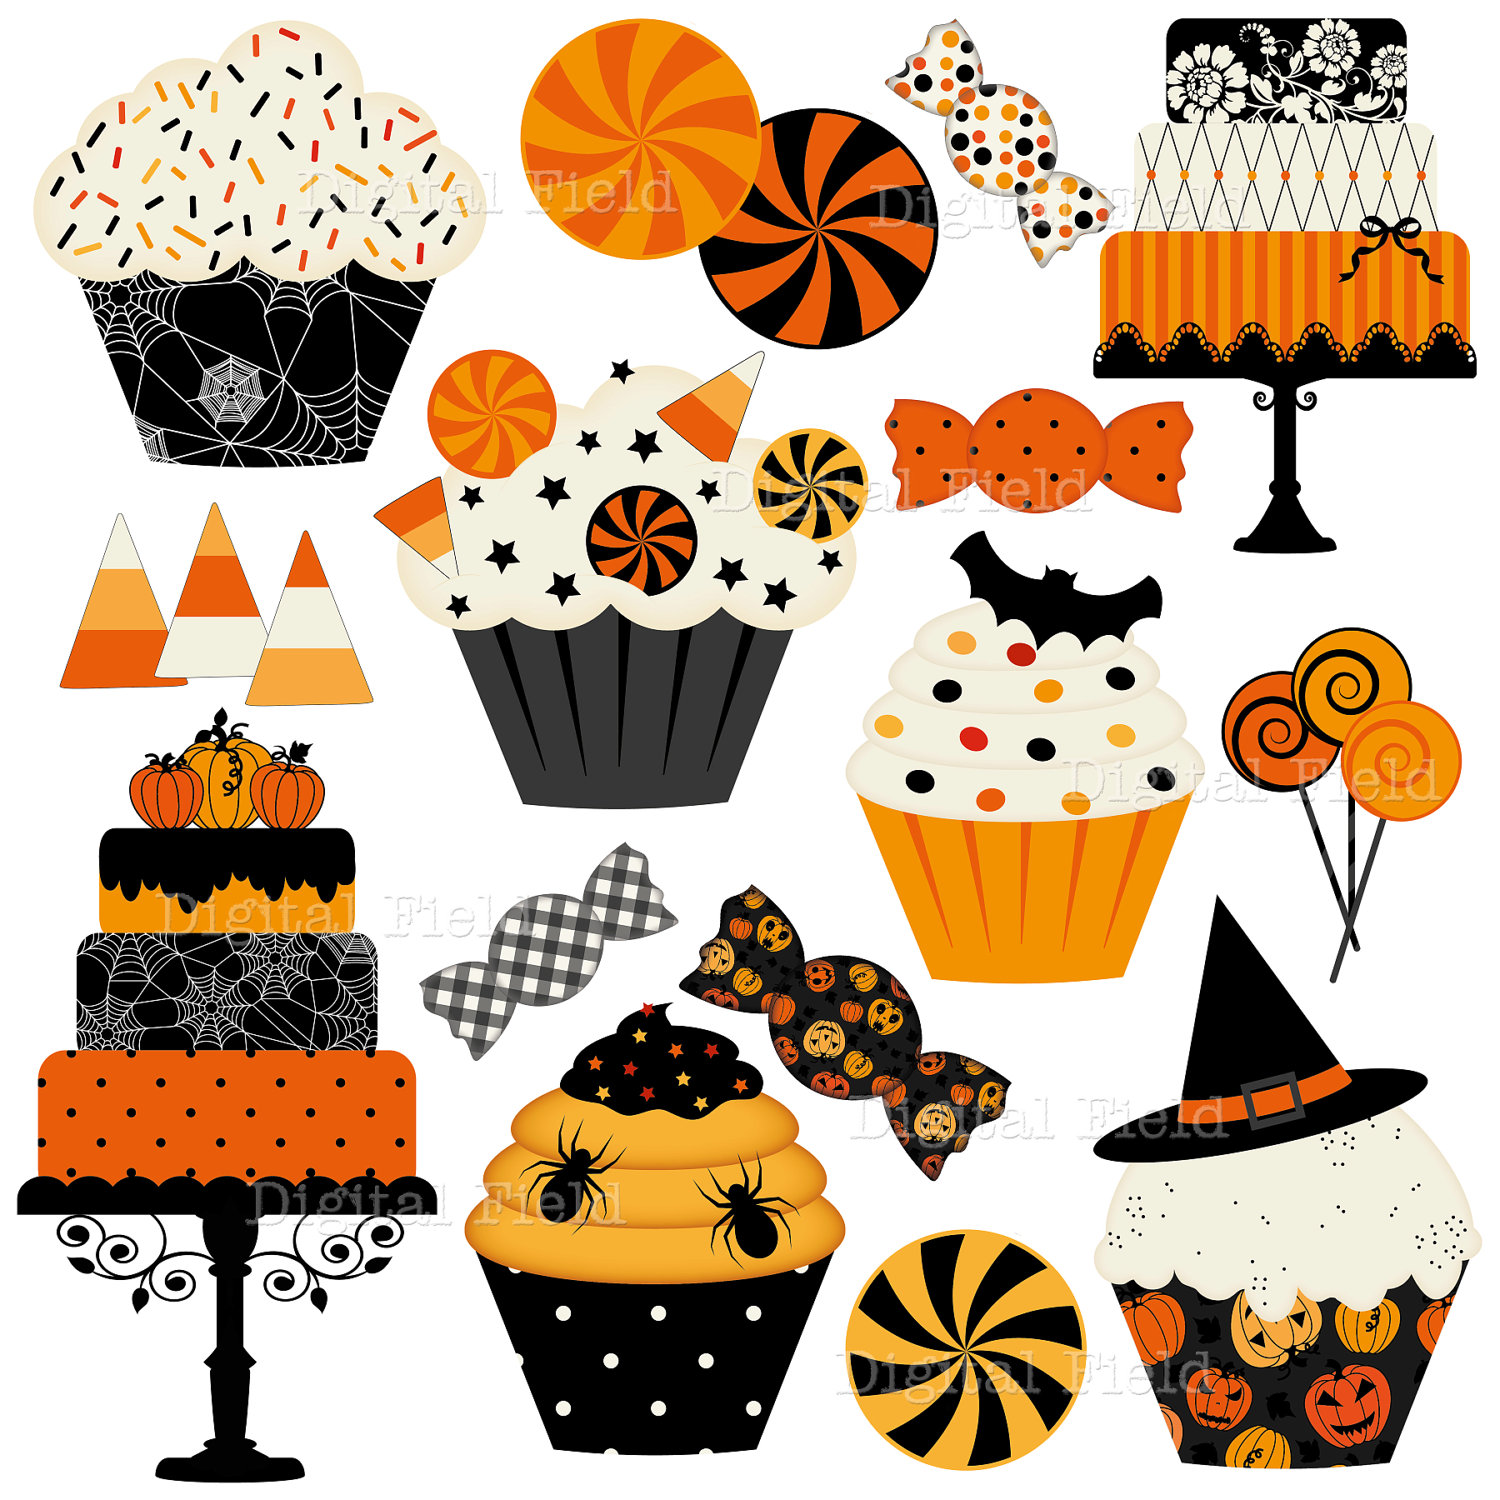 Popular items for candy clip art on Etsy